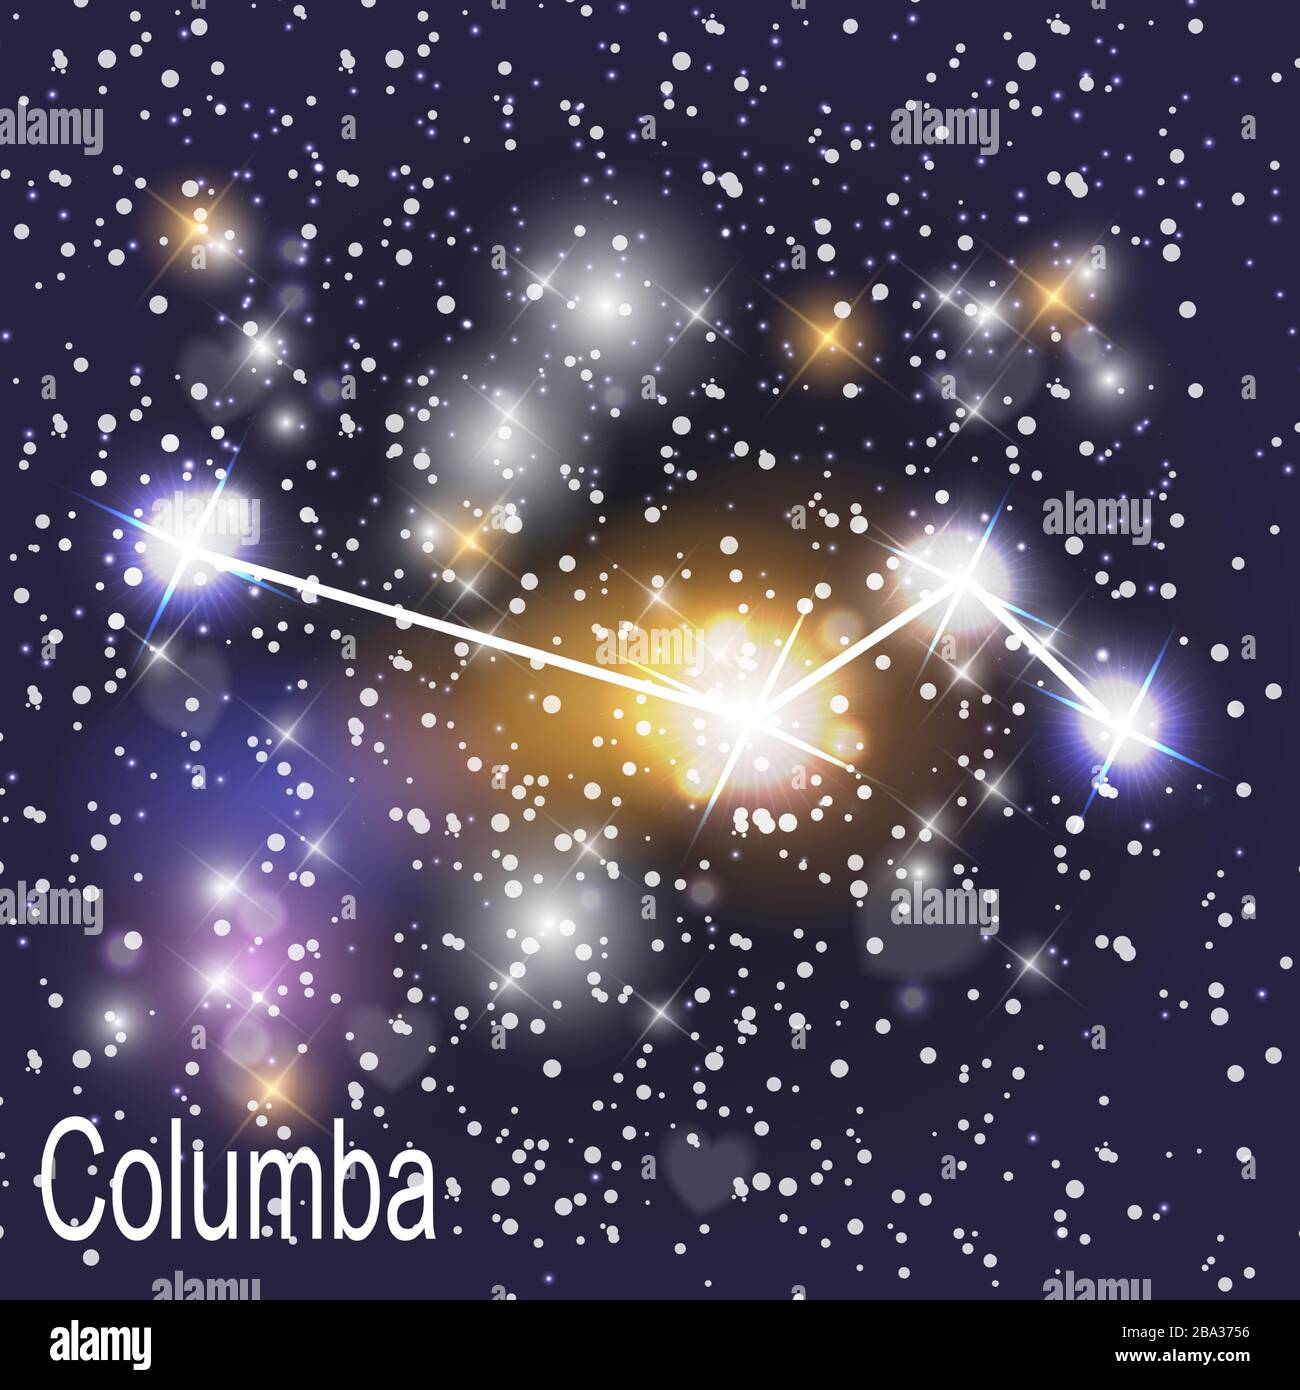 Columba Constellation with Beautiful Bright Stars on the Background of Cosmic Sky Vector Illustration. EPS10 Stock Vector